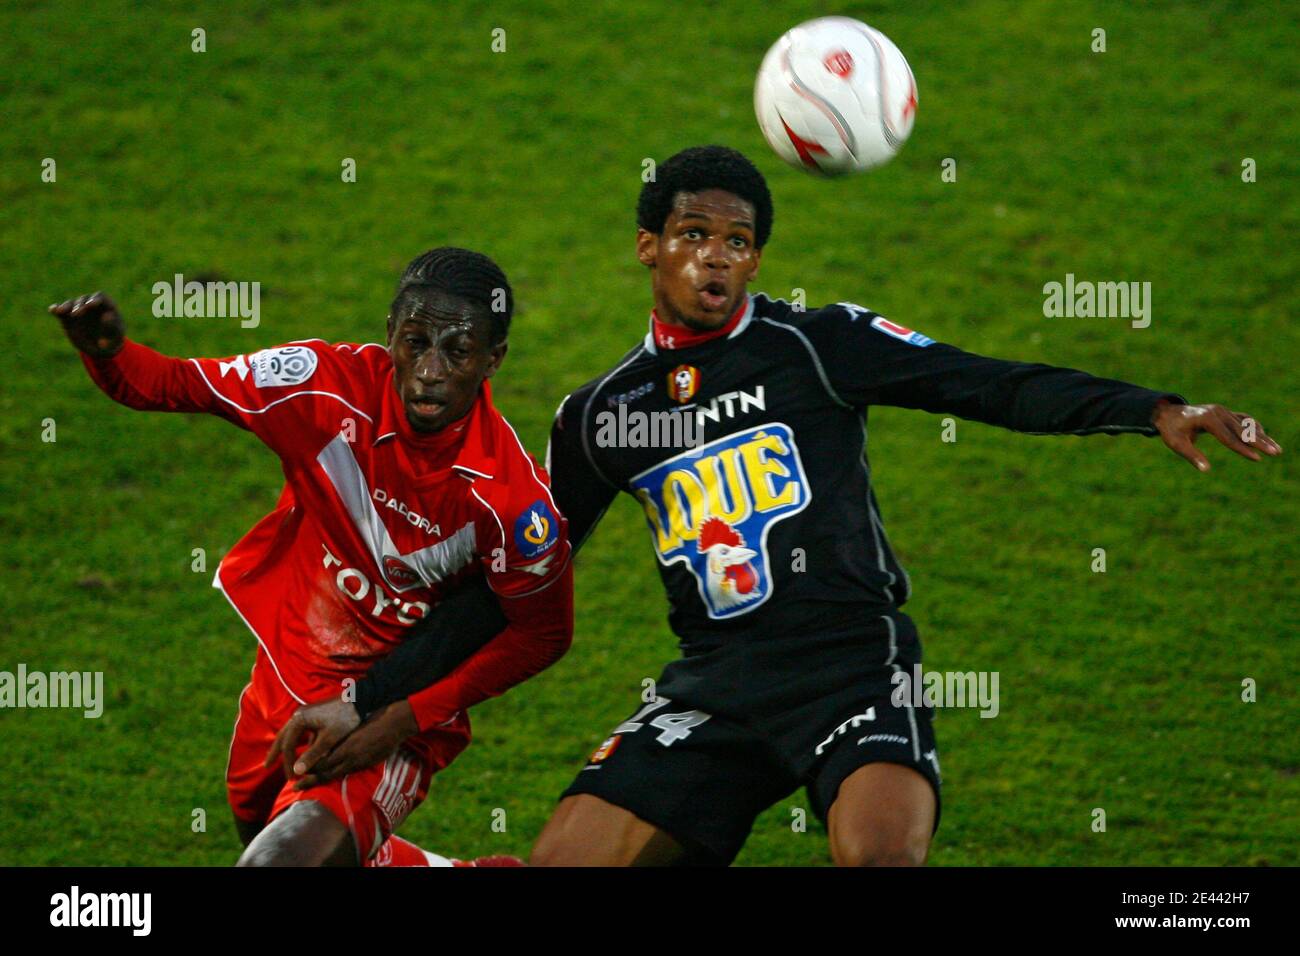 Valenciennes' Amara Karba Bangoura fights for the ball with Le Mans' Ludovic Baal during the French League 1 soccer match Valenciennes vs Le Mans at Nungesser stadium in Valenciennes, France on April 18, 2009. Photo by Mikael LIbert/ABACAPRESS.COM Stock Photo